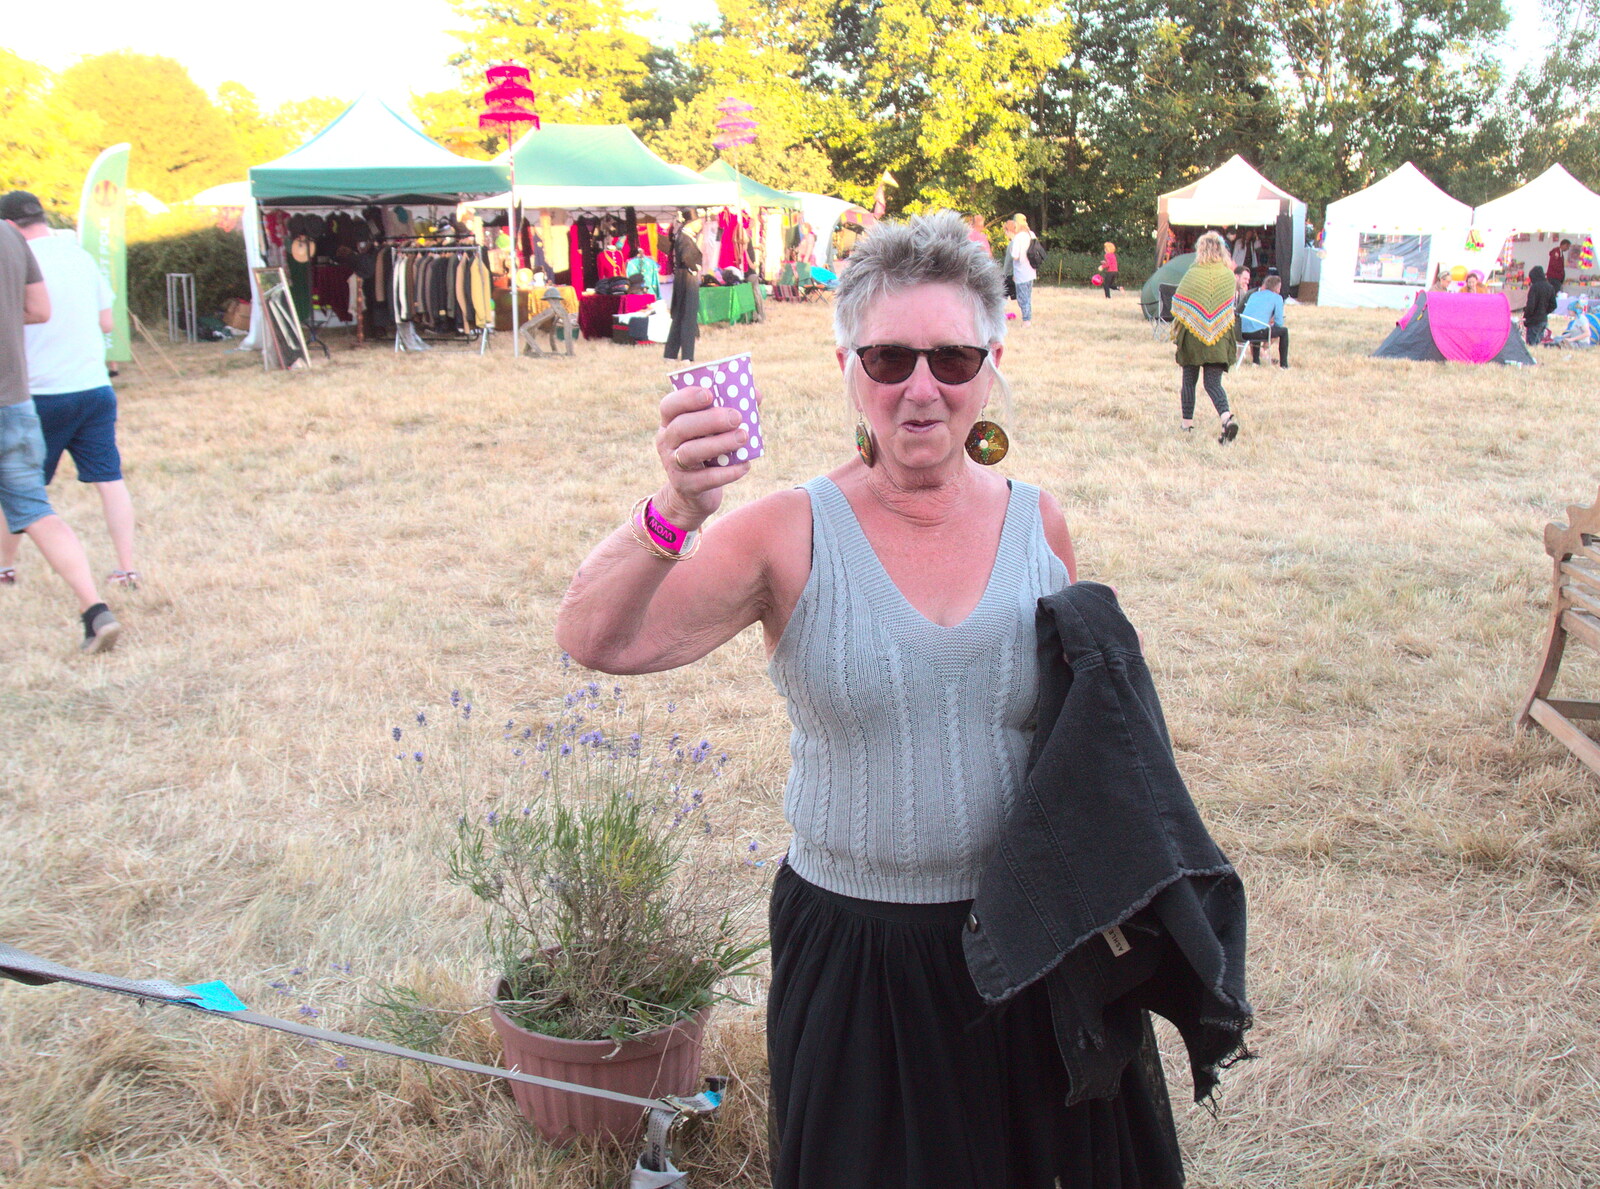 Sandie gives a paper-cup toast from WoW Festival, Burston, Norfolk - 29th June - 1st July 2018